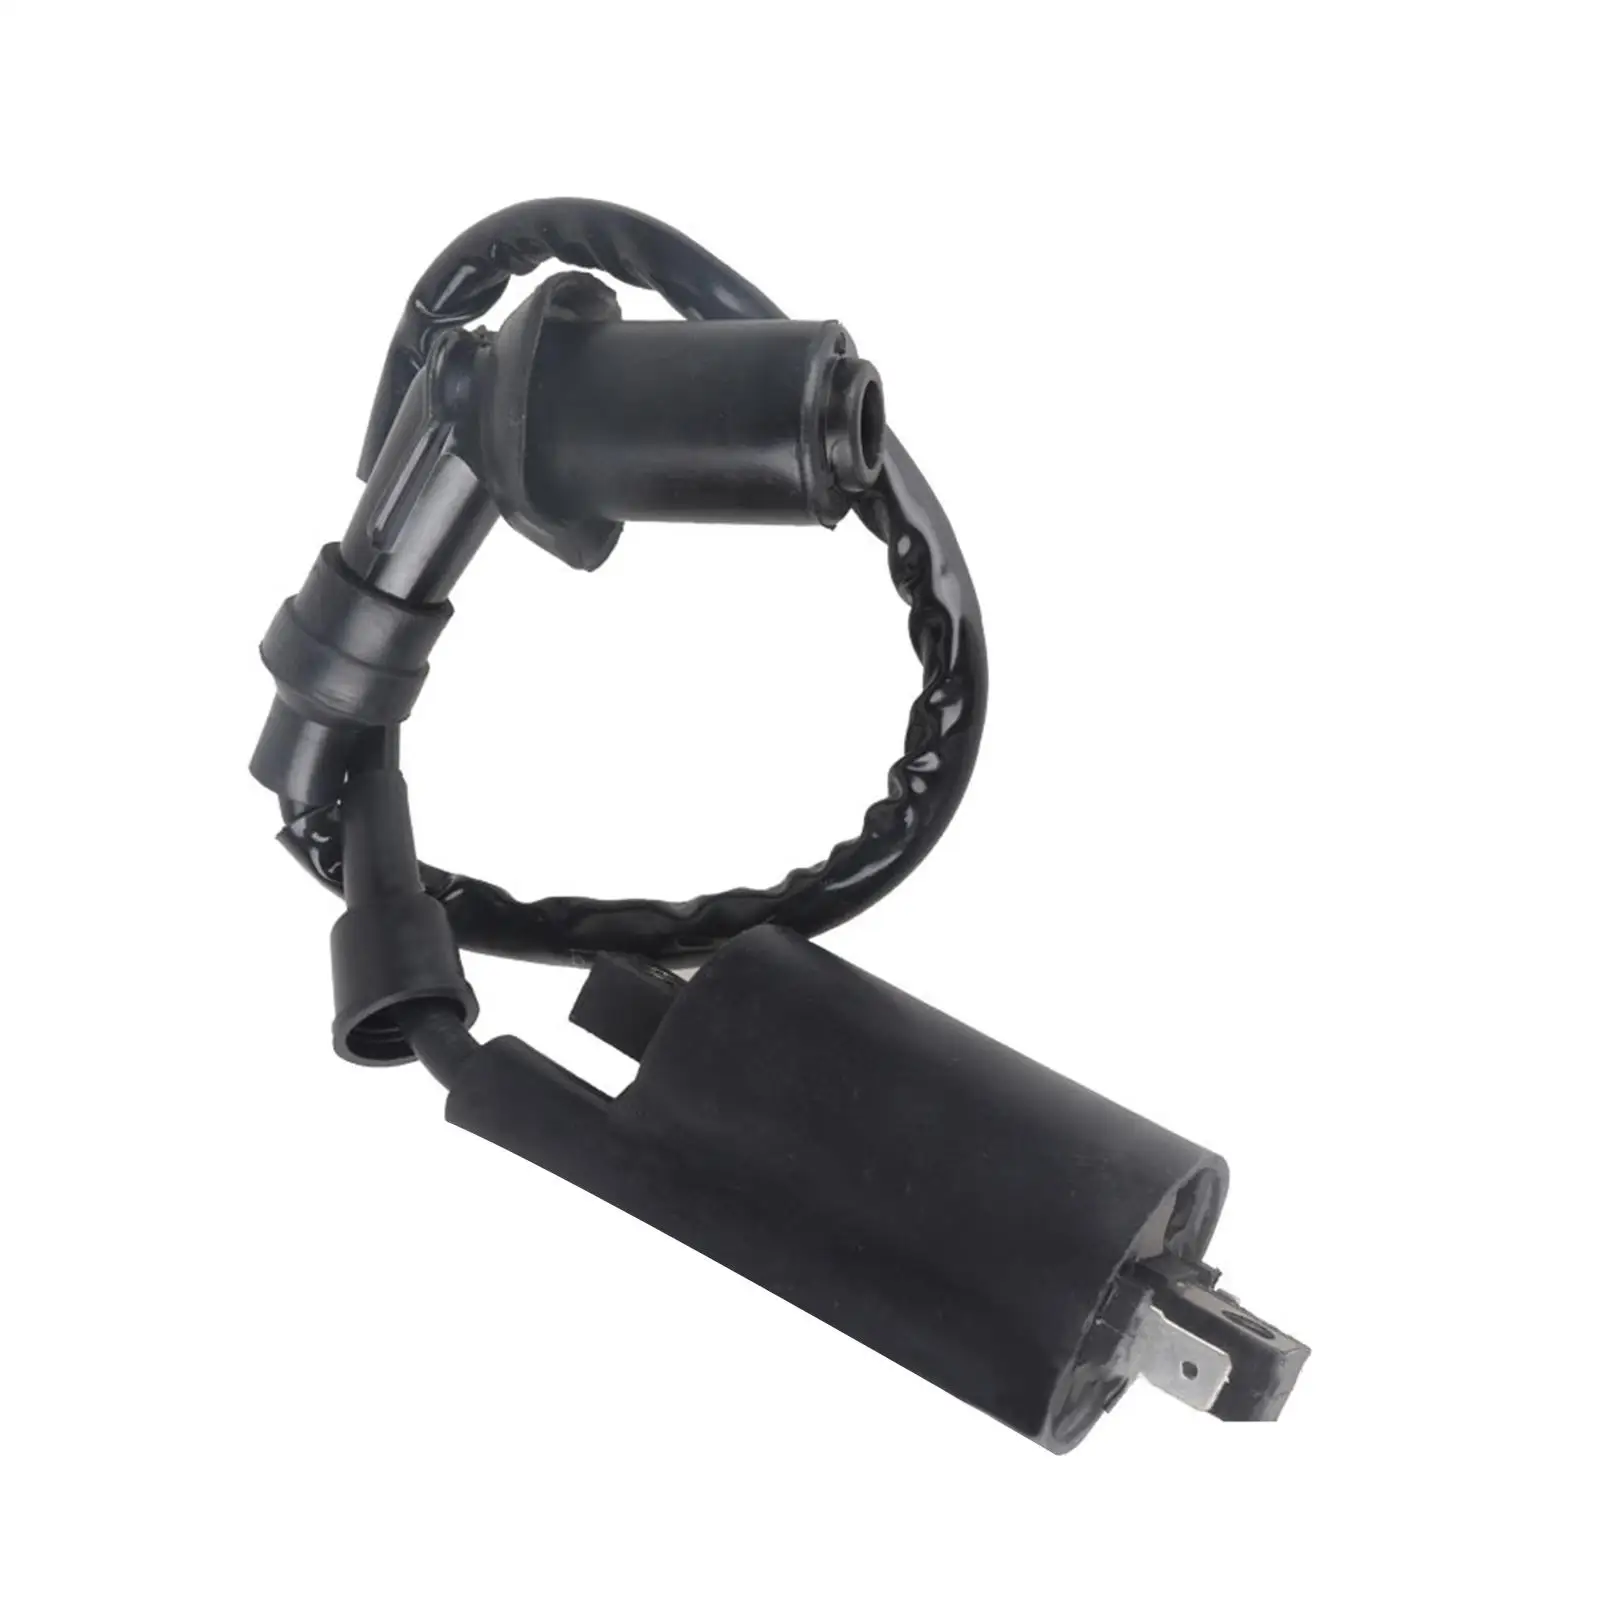 Ignition Coil Motorbike Accessories for Yamaha Virago Route66